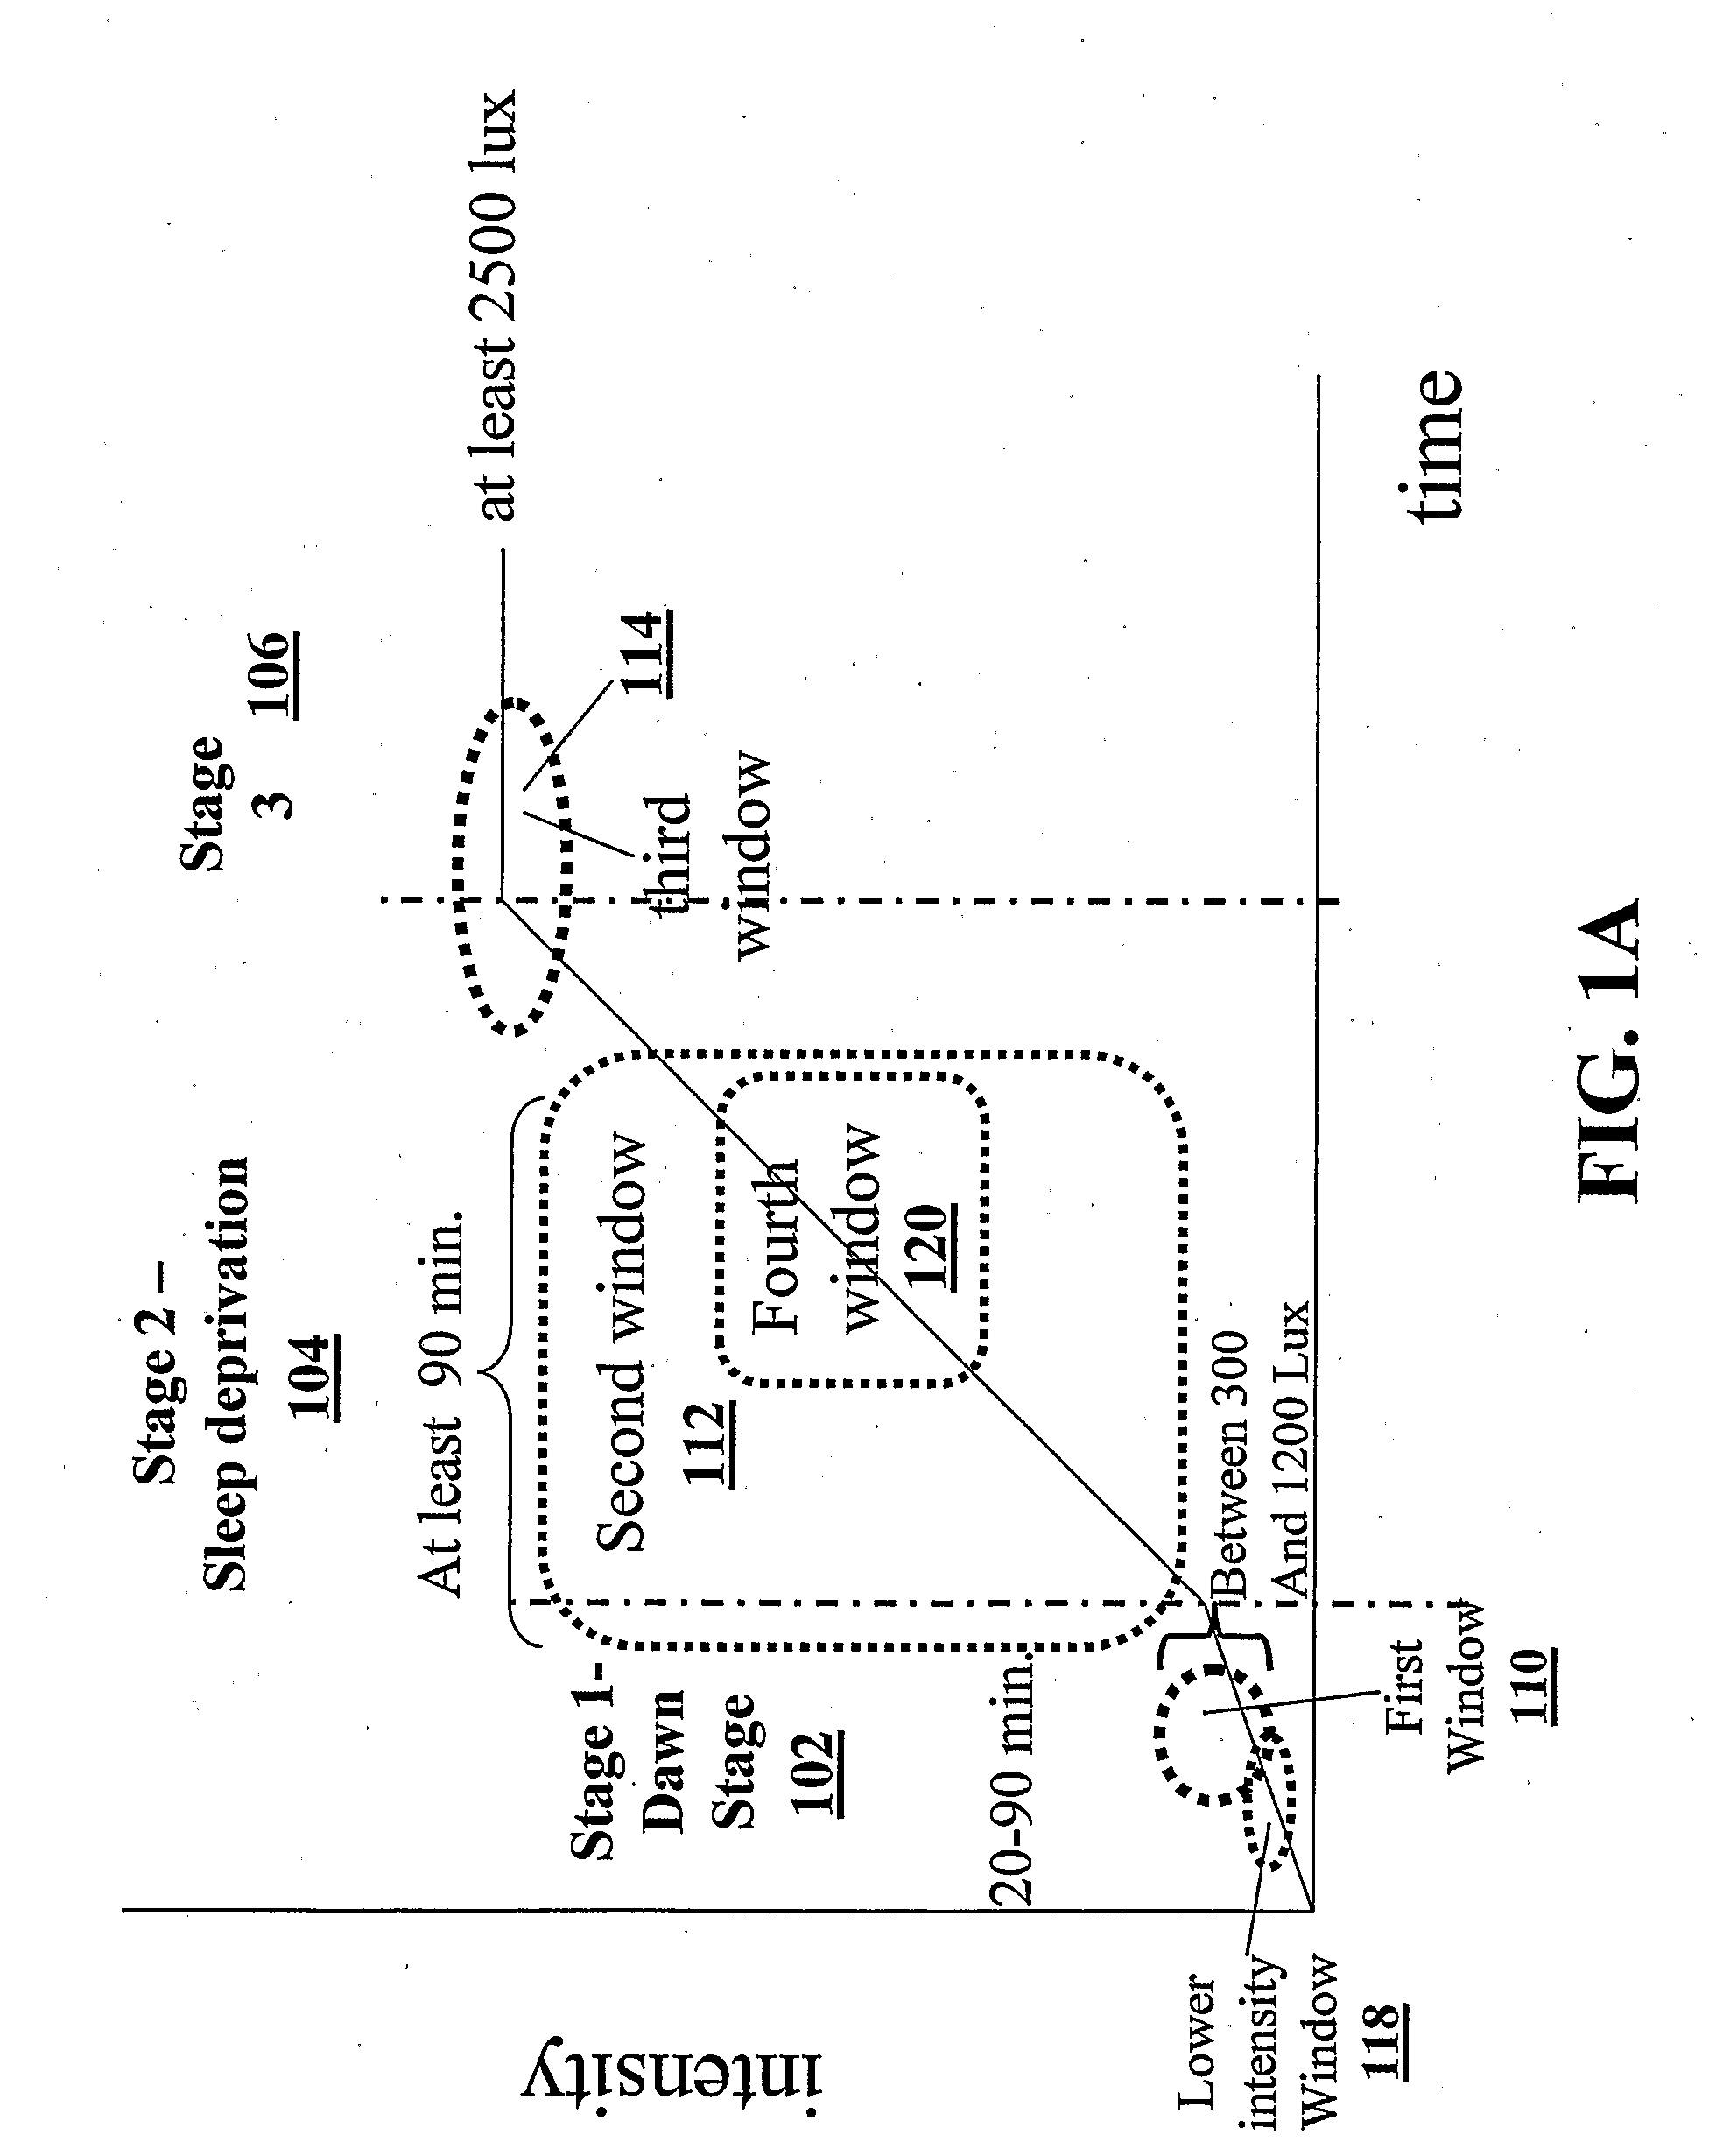 Apparatus and Method for Providing a Multi-Stage Light Treatment